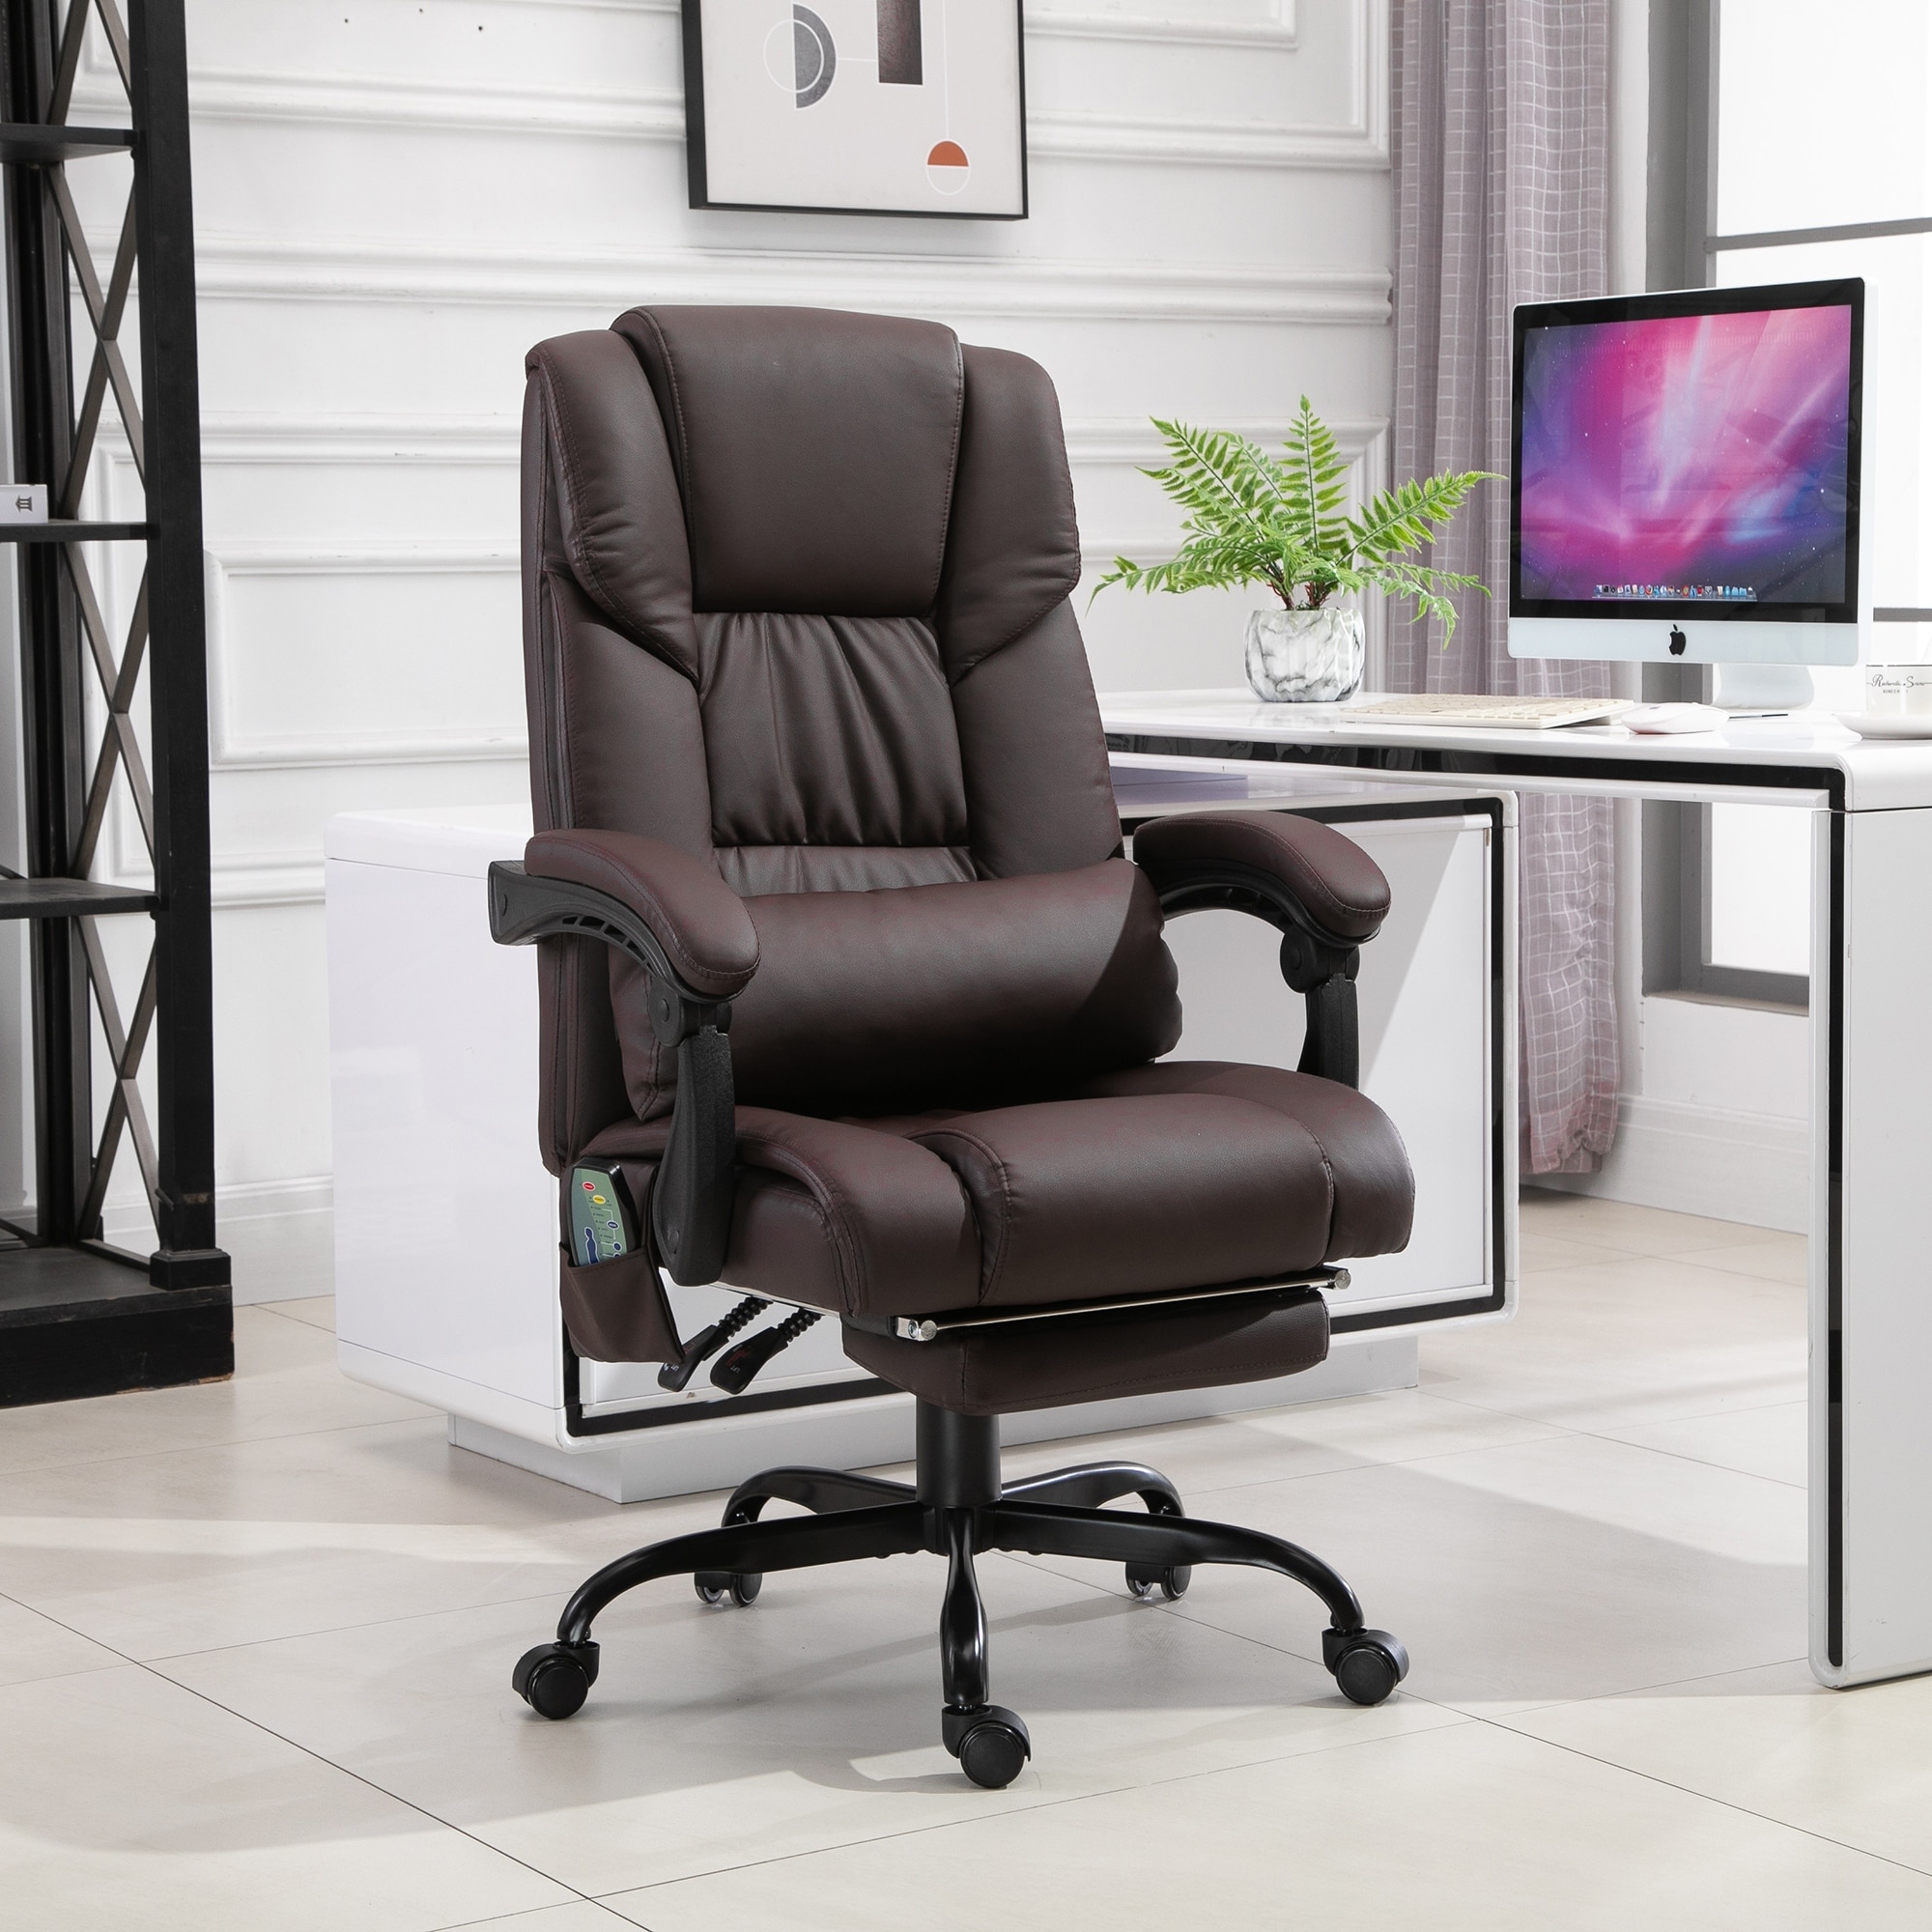 Vinsetto Office Desk Chair Recliner, Height Adjustable Movable